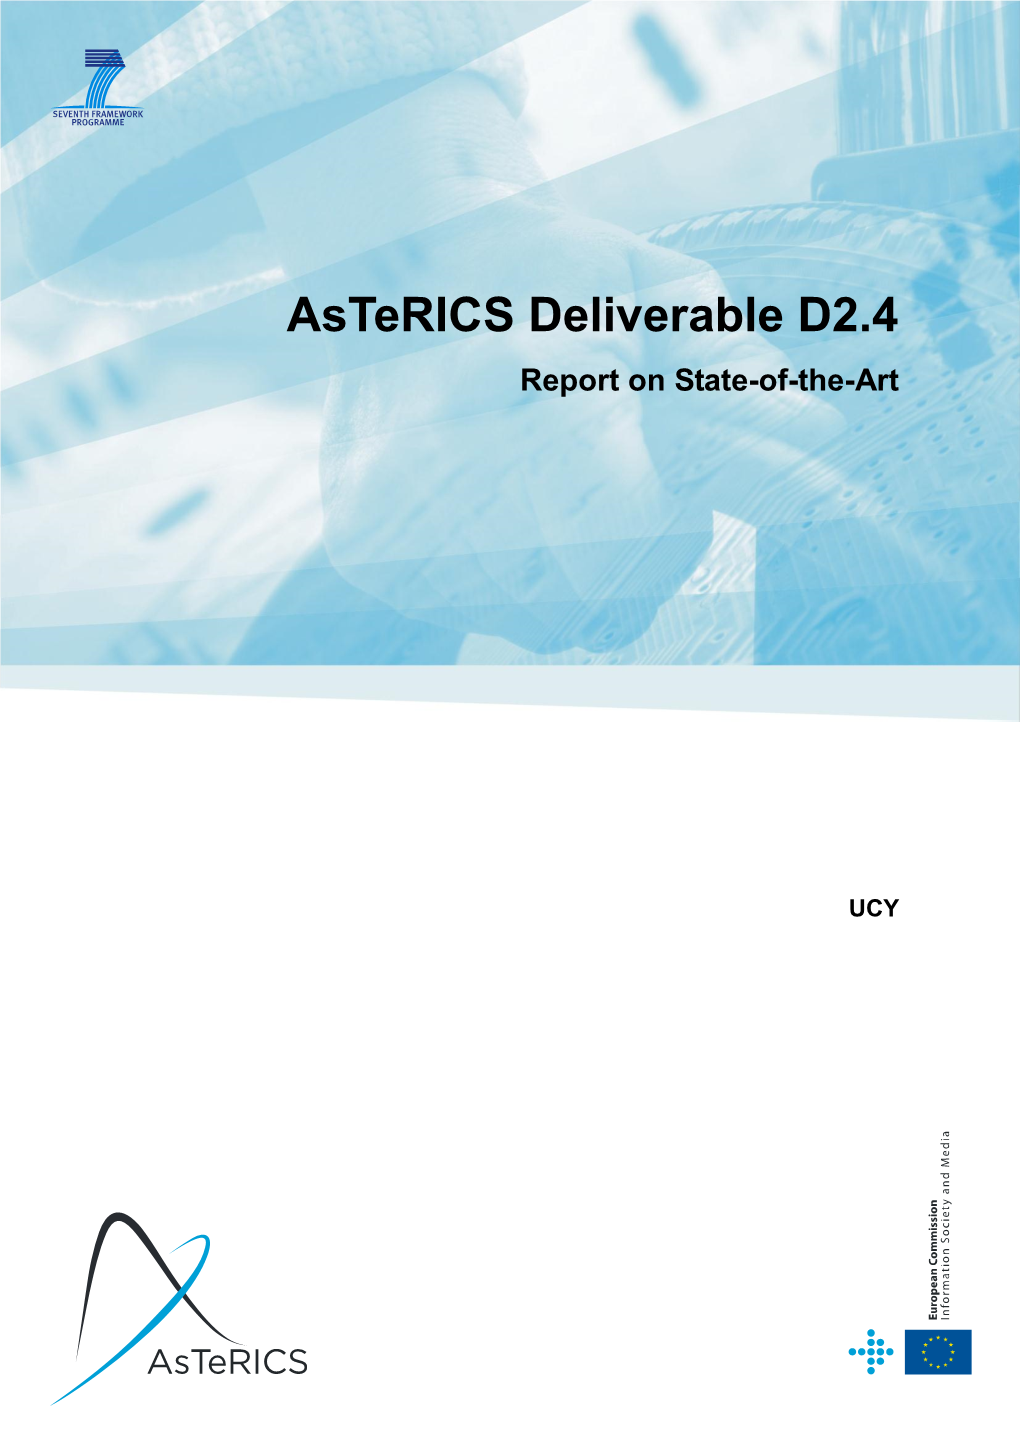 D2.4 Report on State-Of-The-Art